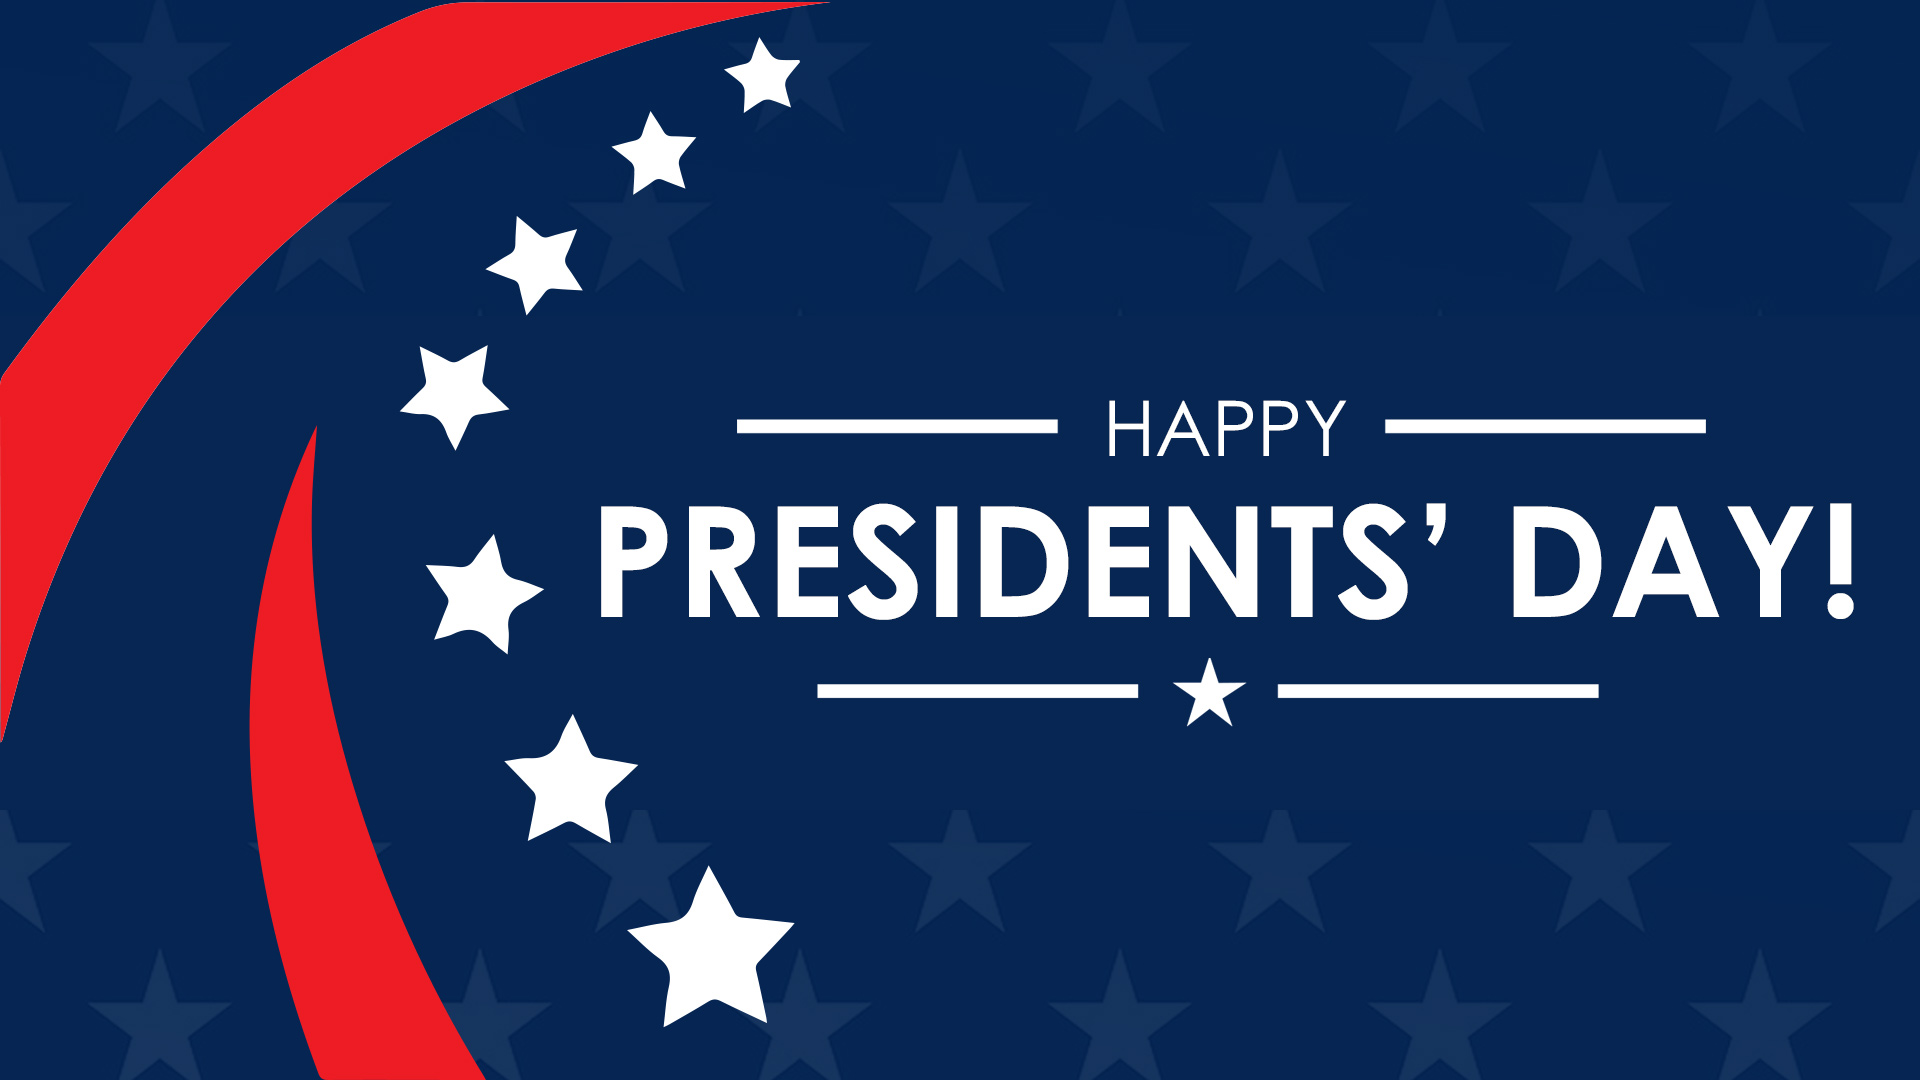 Free Graphic | Holidays | President's Day